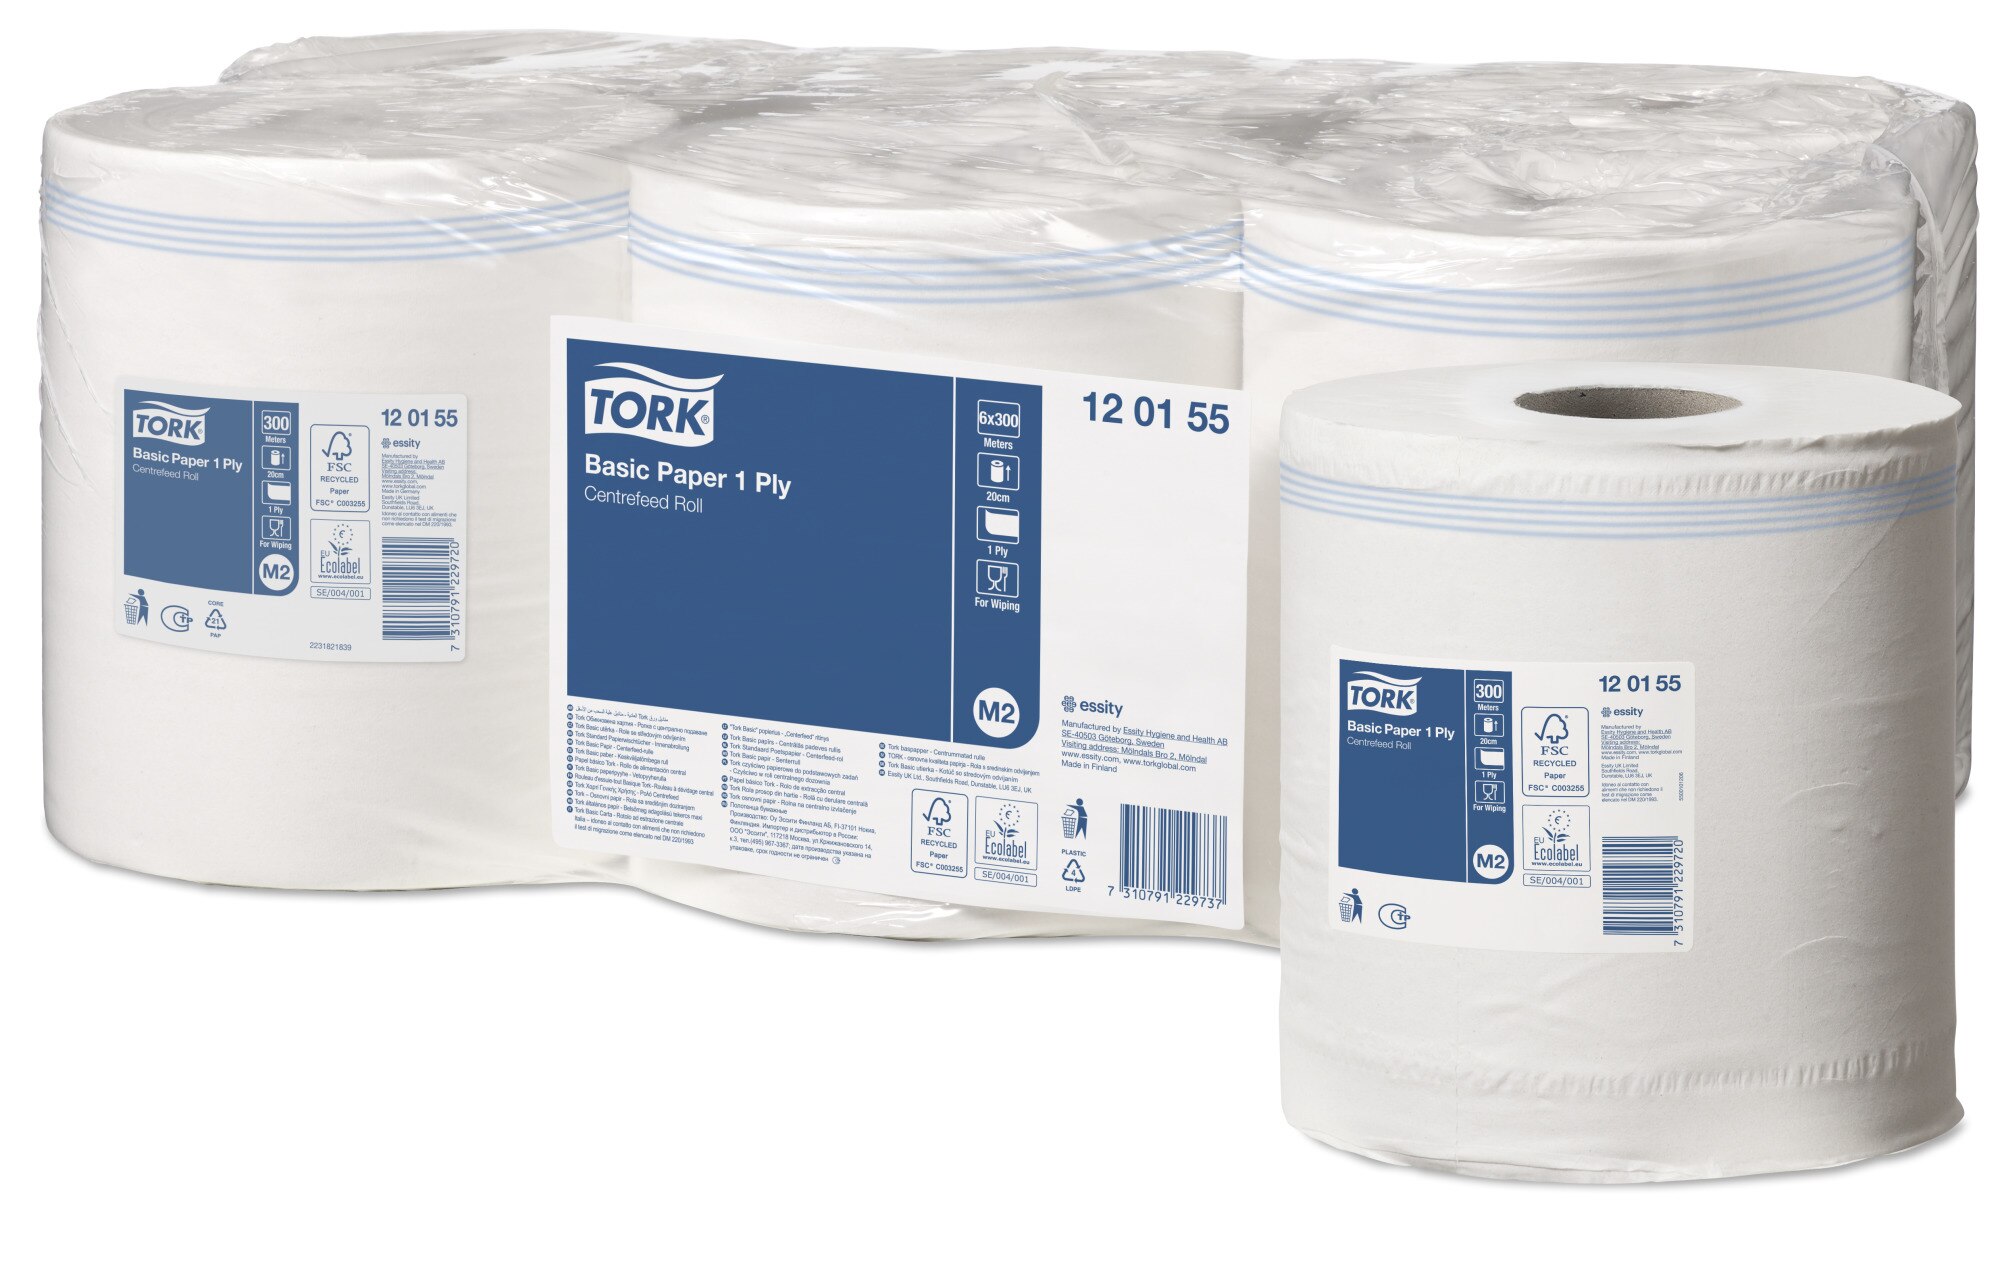 13 24 51A NEW 4-Pack of Blue Shop Towel Rolls by Tork for Centerfeed Dispenser 